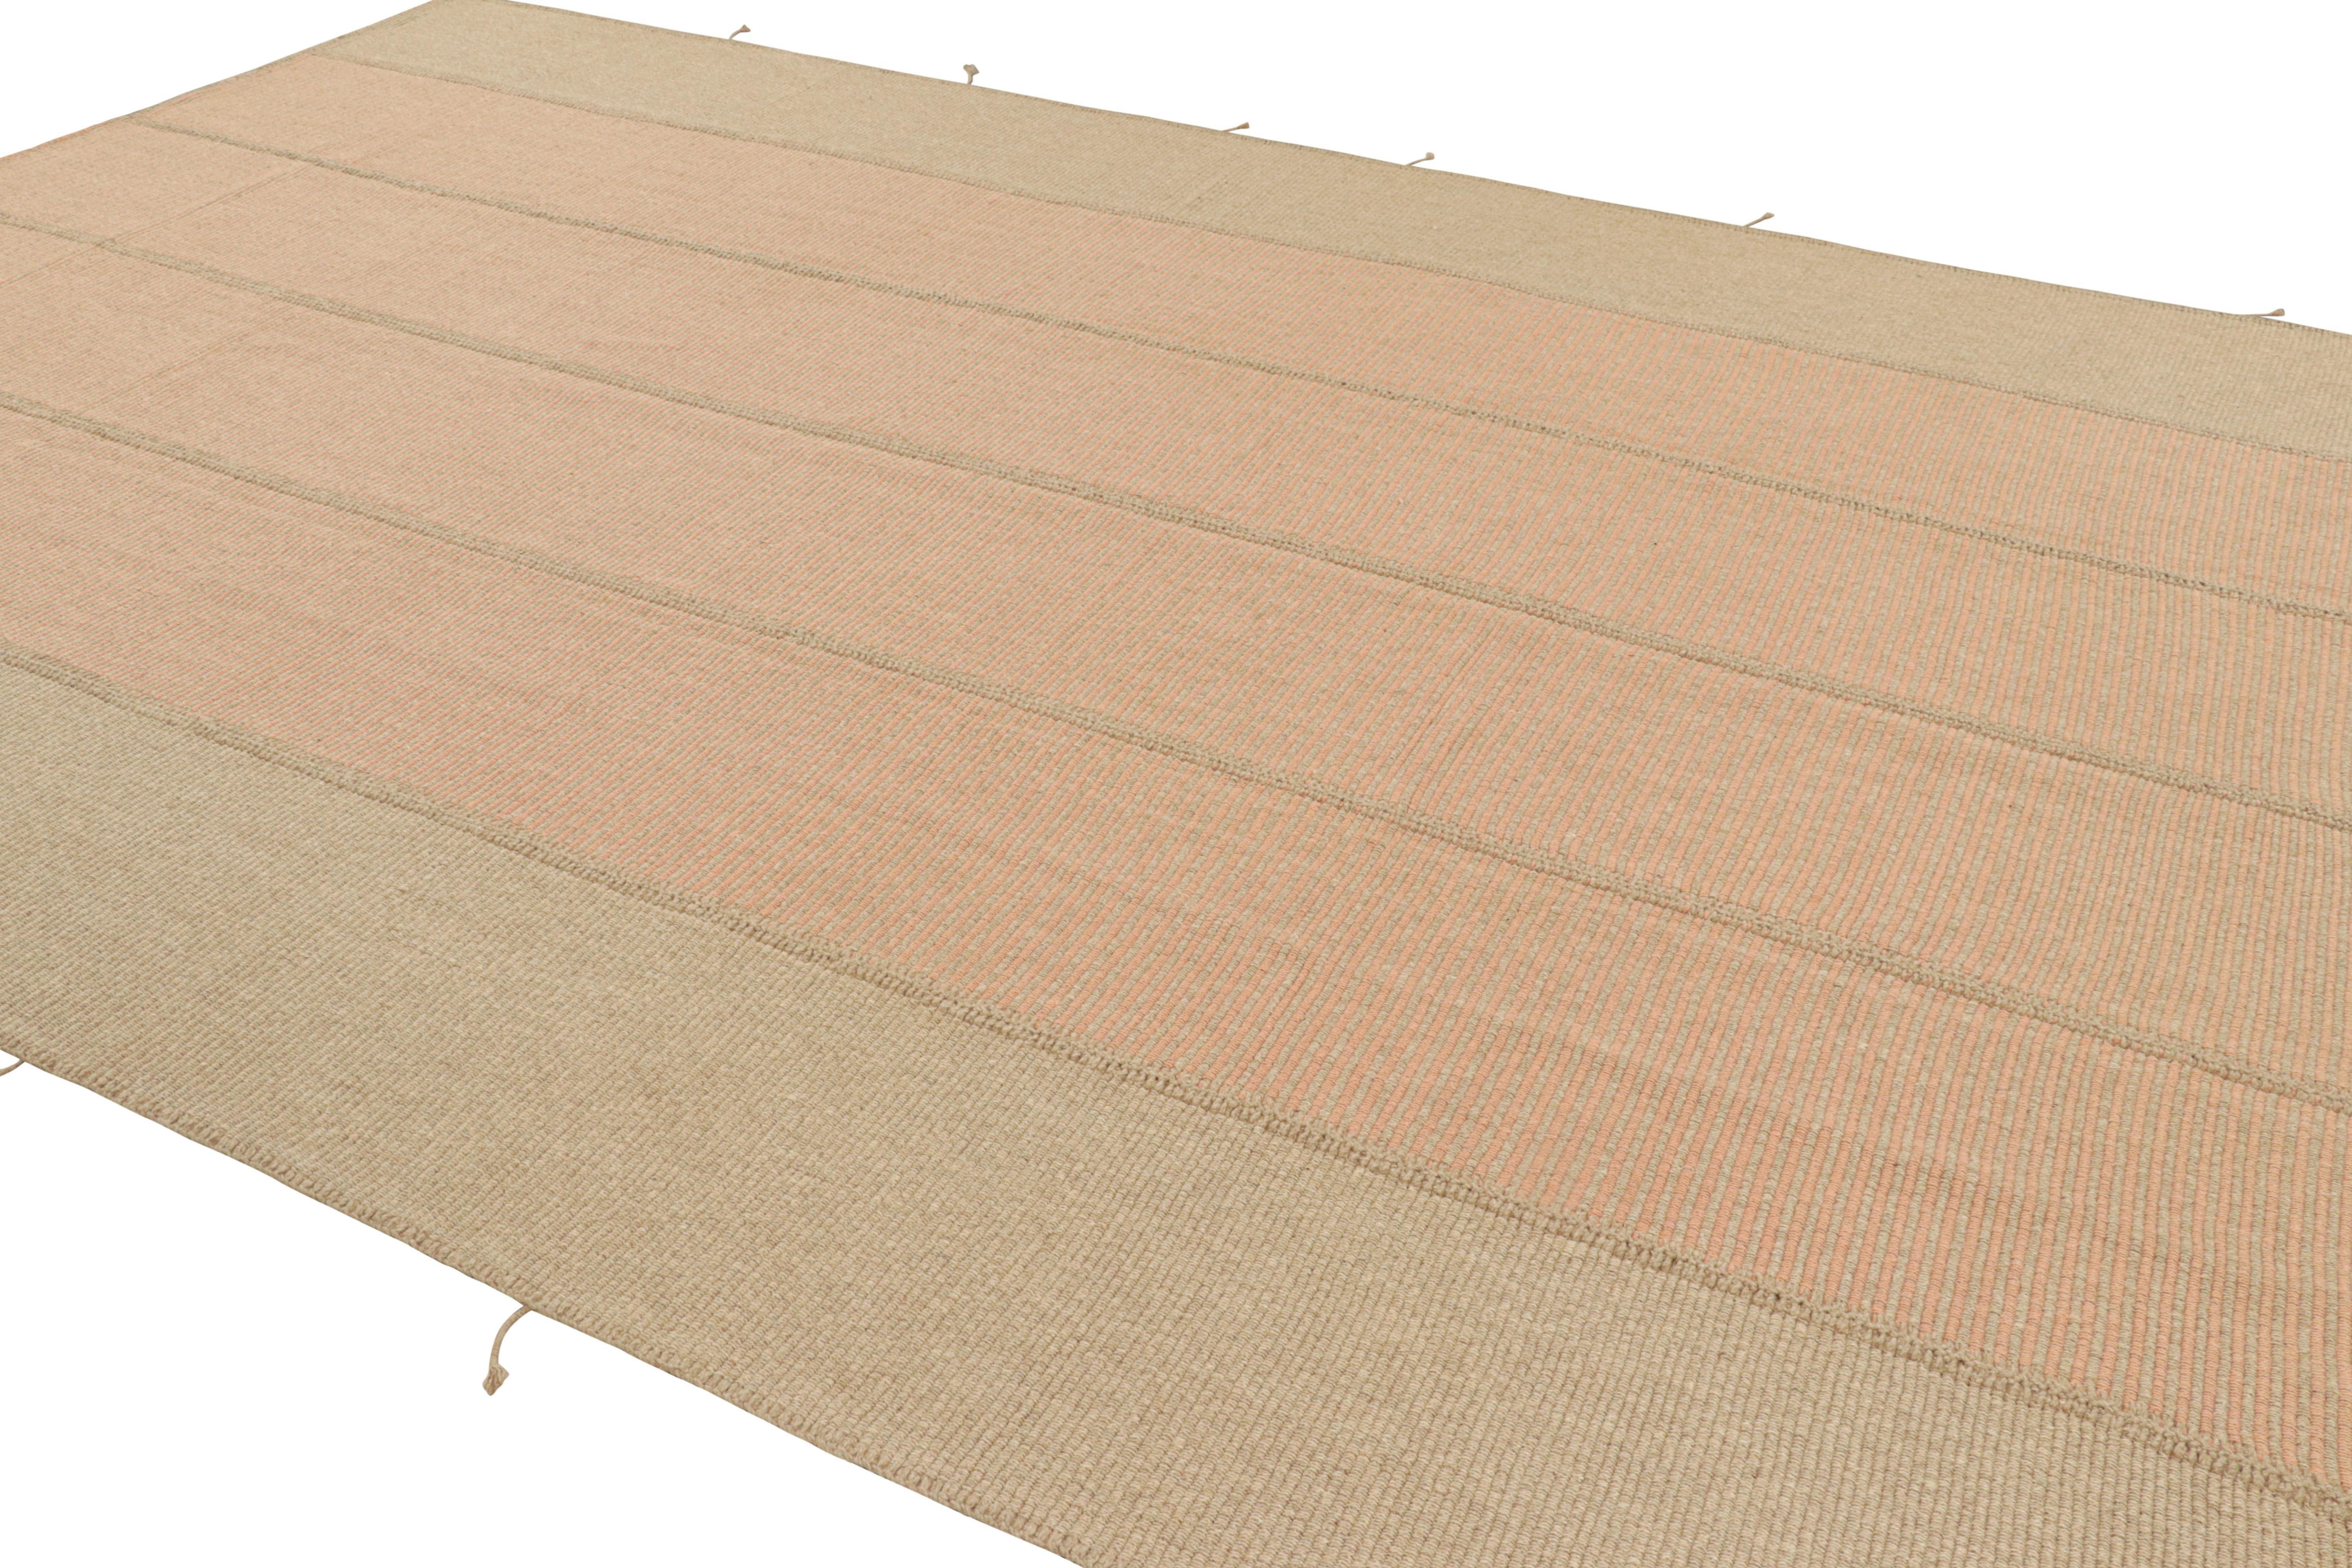 Afghan Rug & Kilim’s Contemporary Kilim in Peach and Beige Textural Stripes  For Sale